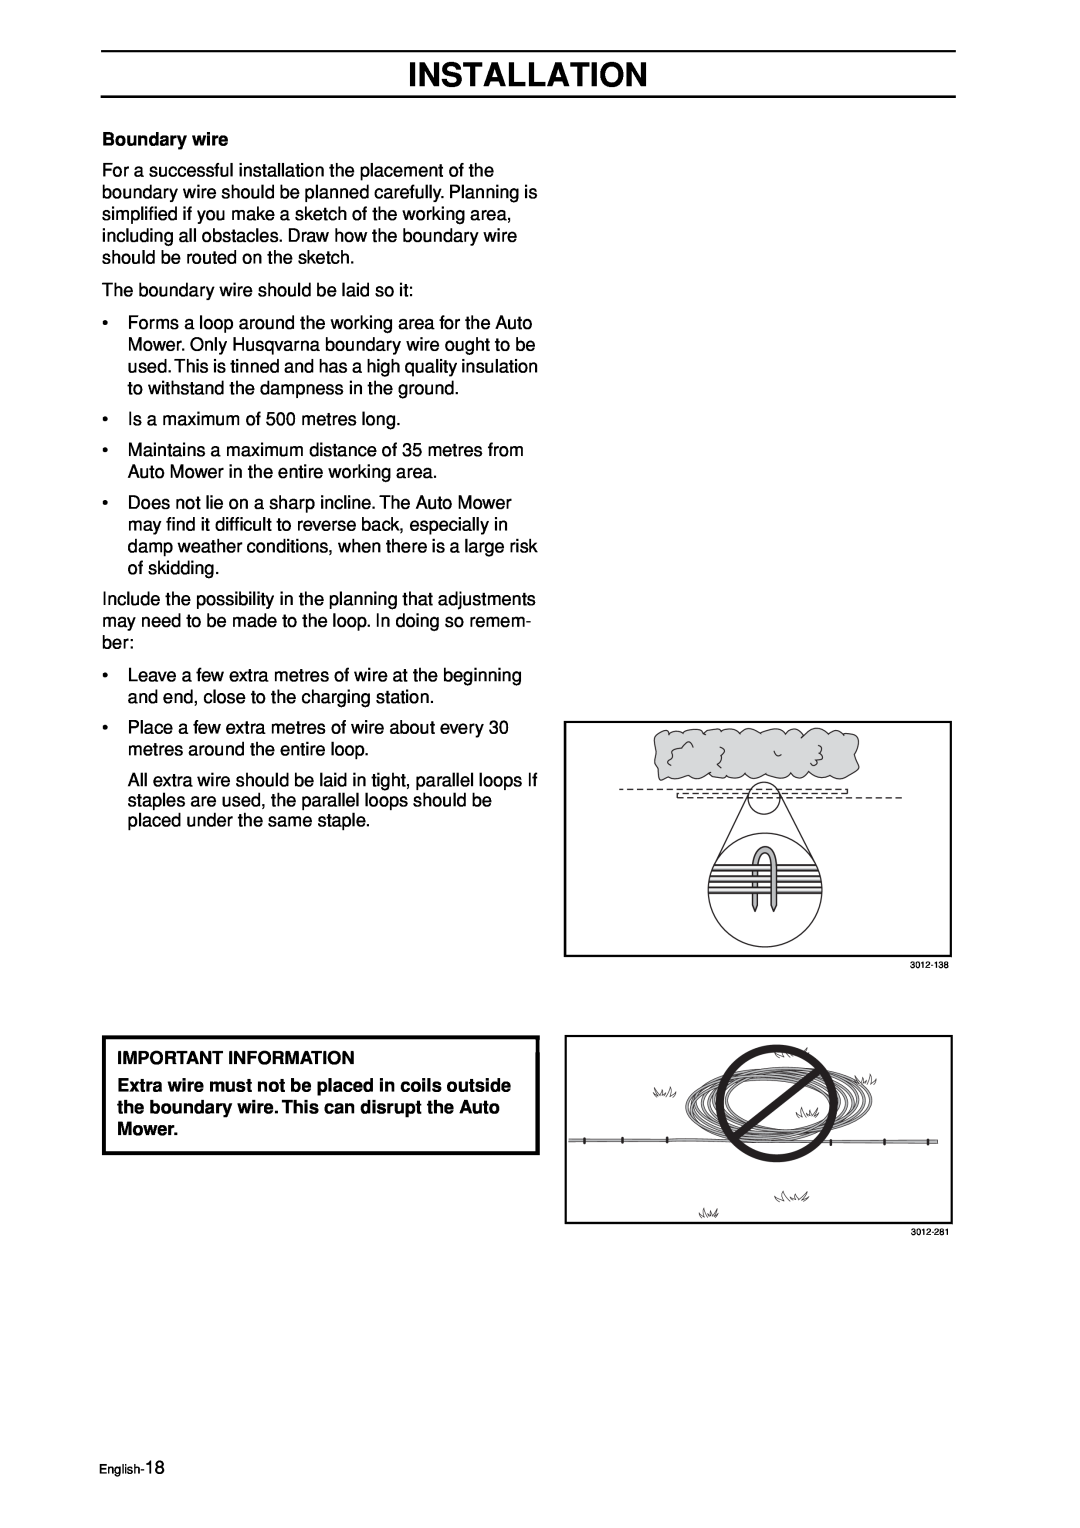 Husqvarna Auto Mower manual Installation, Boundary wire, The boundary wire should be laid so it, Important Information 